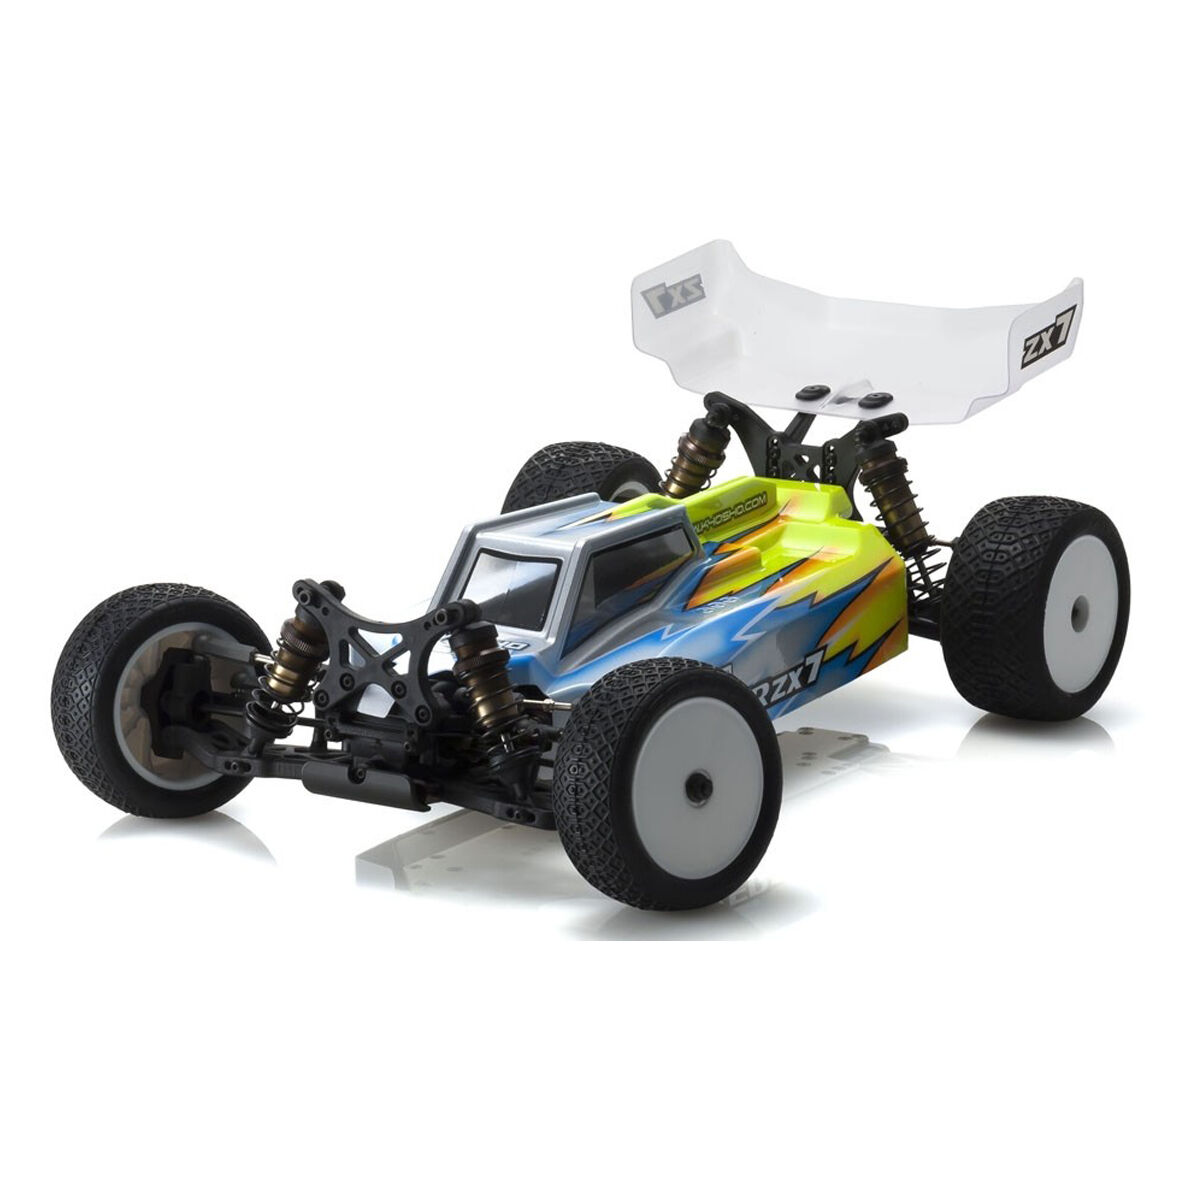 Kyosho 1/10 Lazer ZX7 4WD Buggy Kit | Tower Hobbies